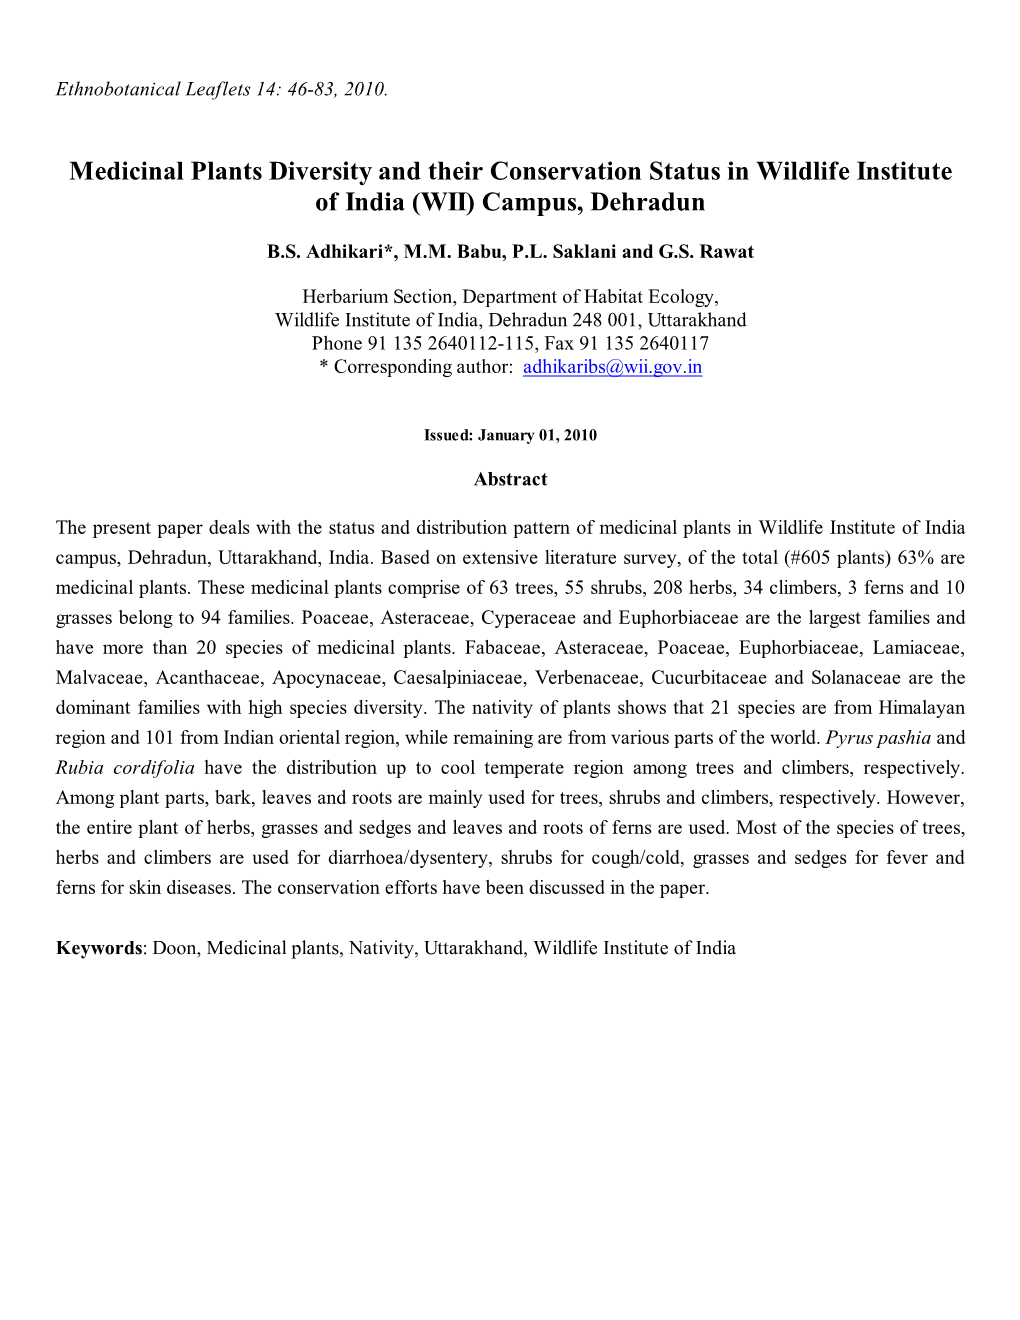 Medicinal Plants Diversity and Their Conservation Status in Wildlife